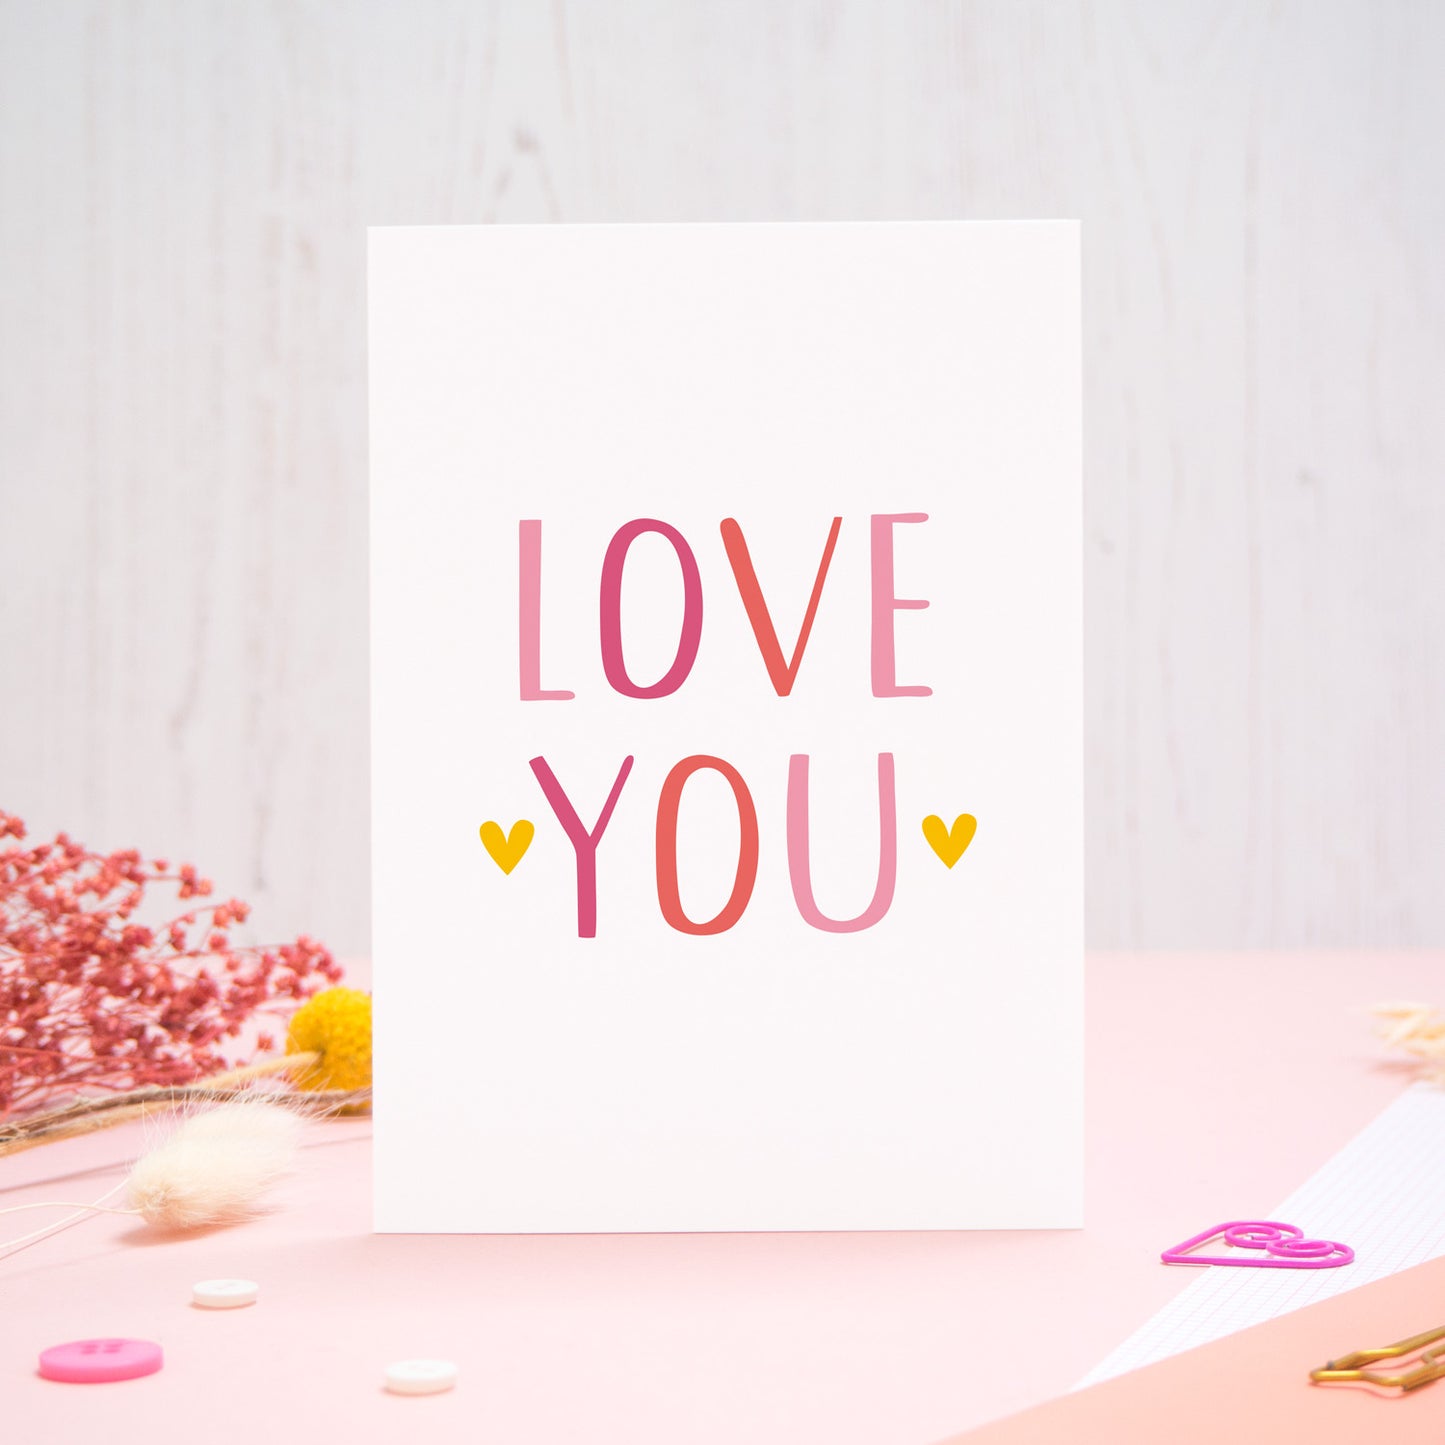 An anniversary ‘love you’ card photographed stood on a pink and white background with floral props, paper clips, and buttons. This image shows the ‘love you’ anniversary card in the pink colour way. 